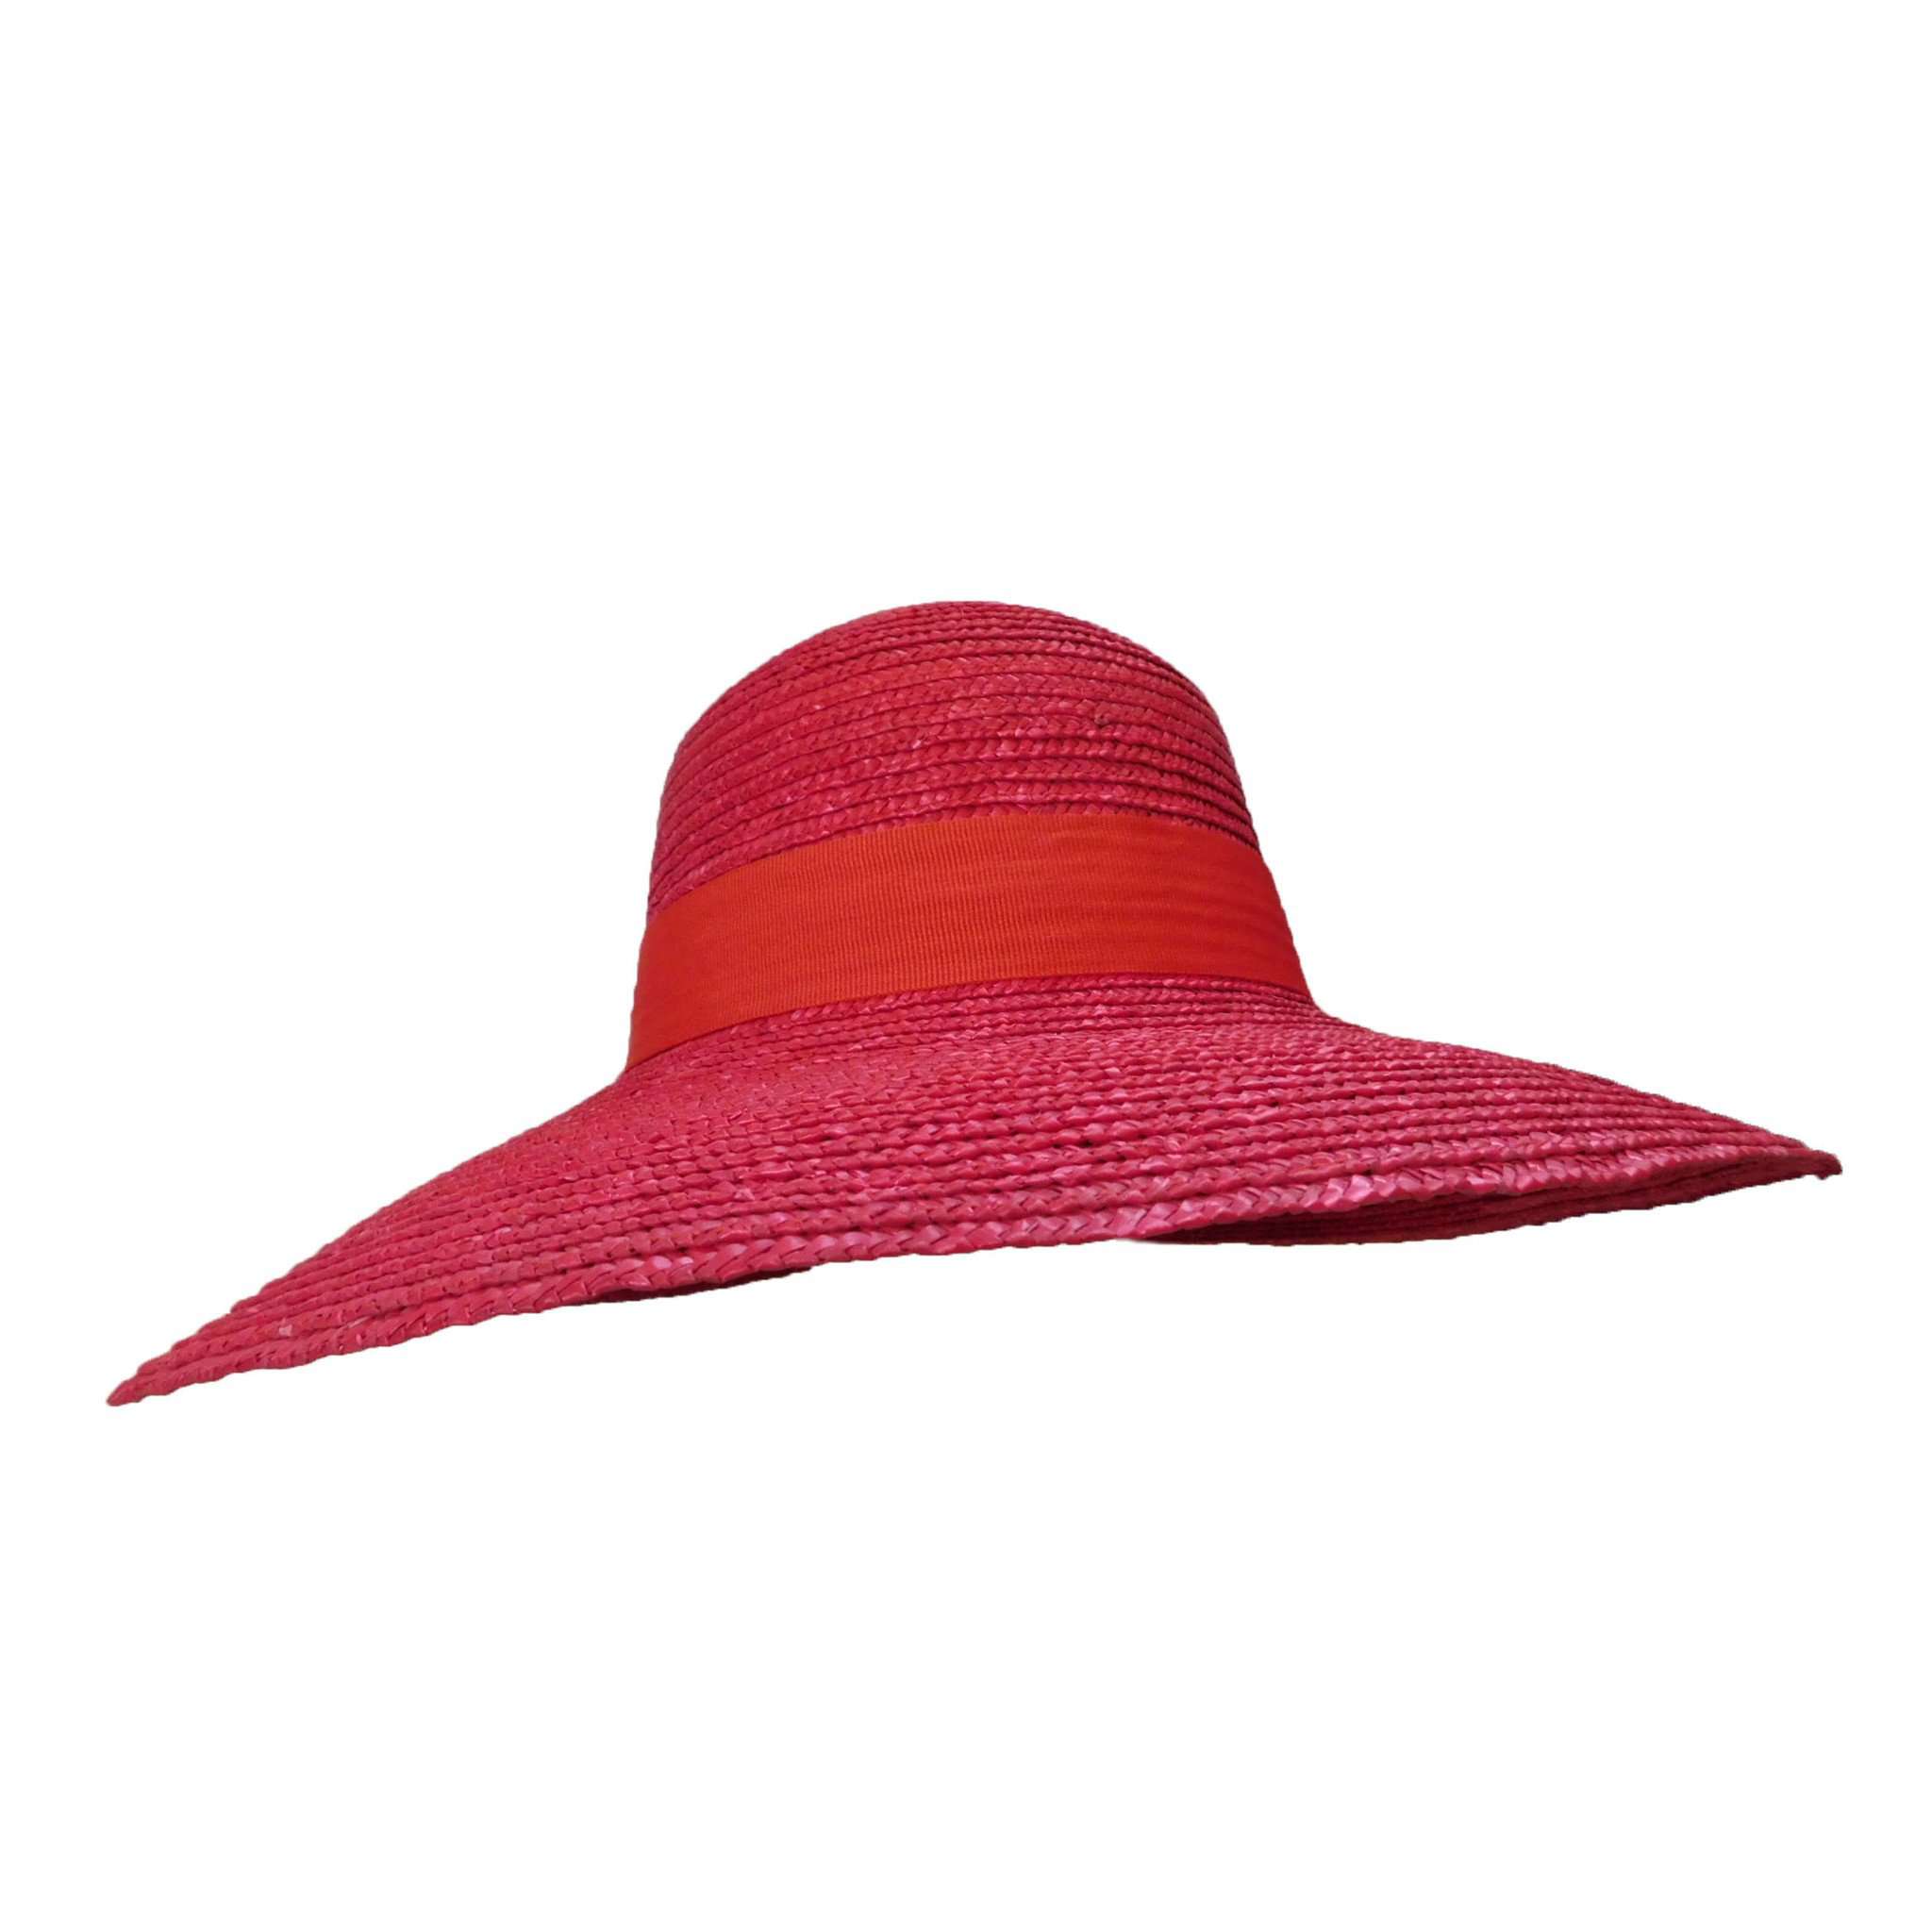 Red Straw Hat with Ribbon and Bow Wide Brim Hat Great hats by Karen Keith    